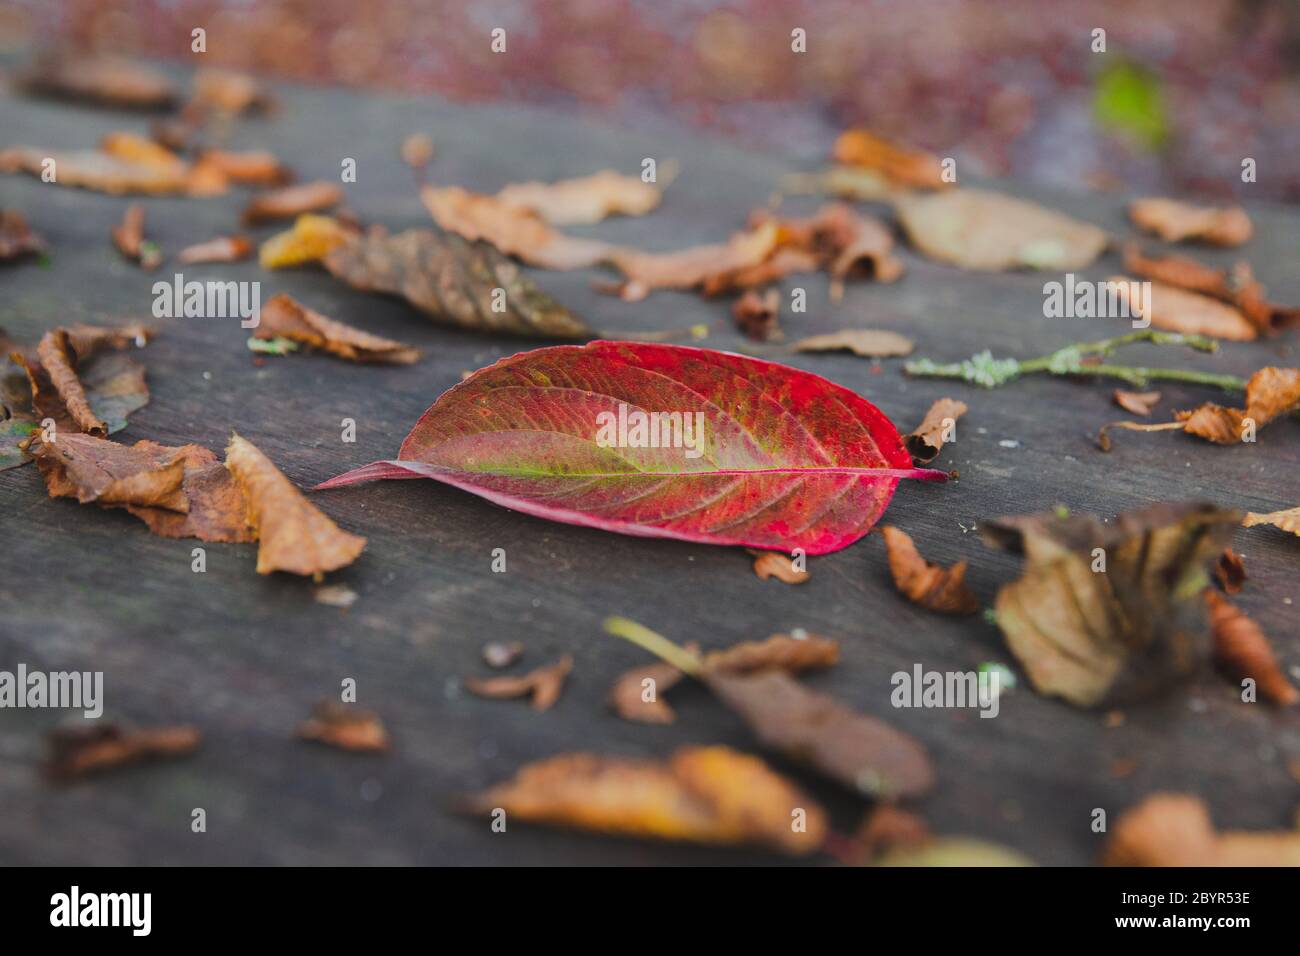 A close up shot of a fallen red leaf on a wooden table in a park in autumn surrounded with sere brown leaves Stock Photo